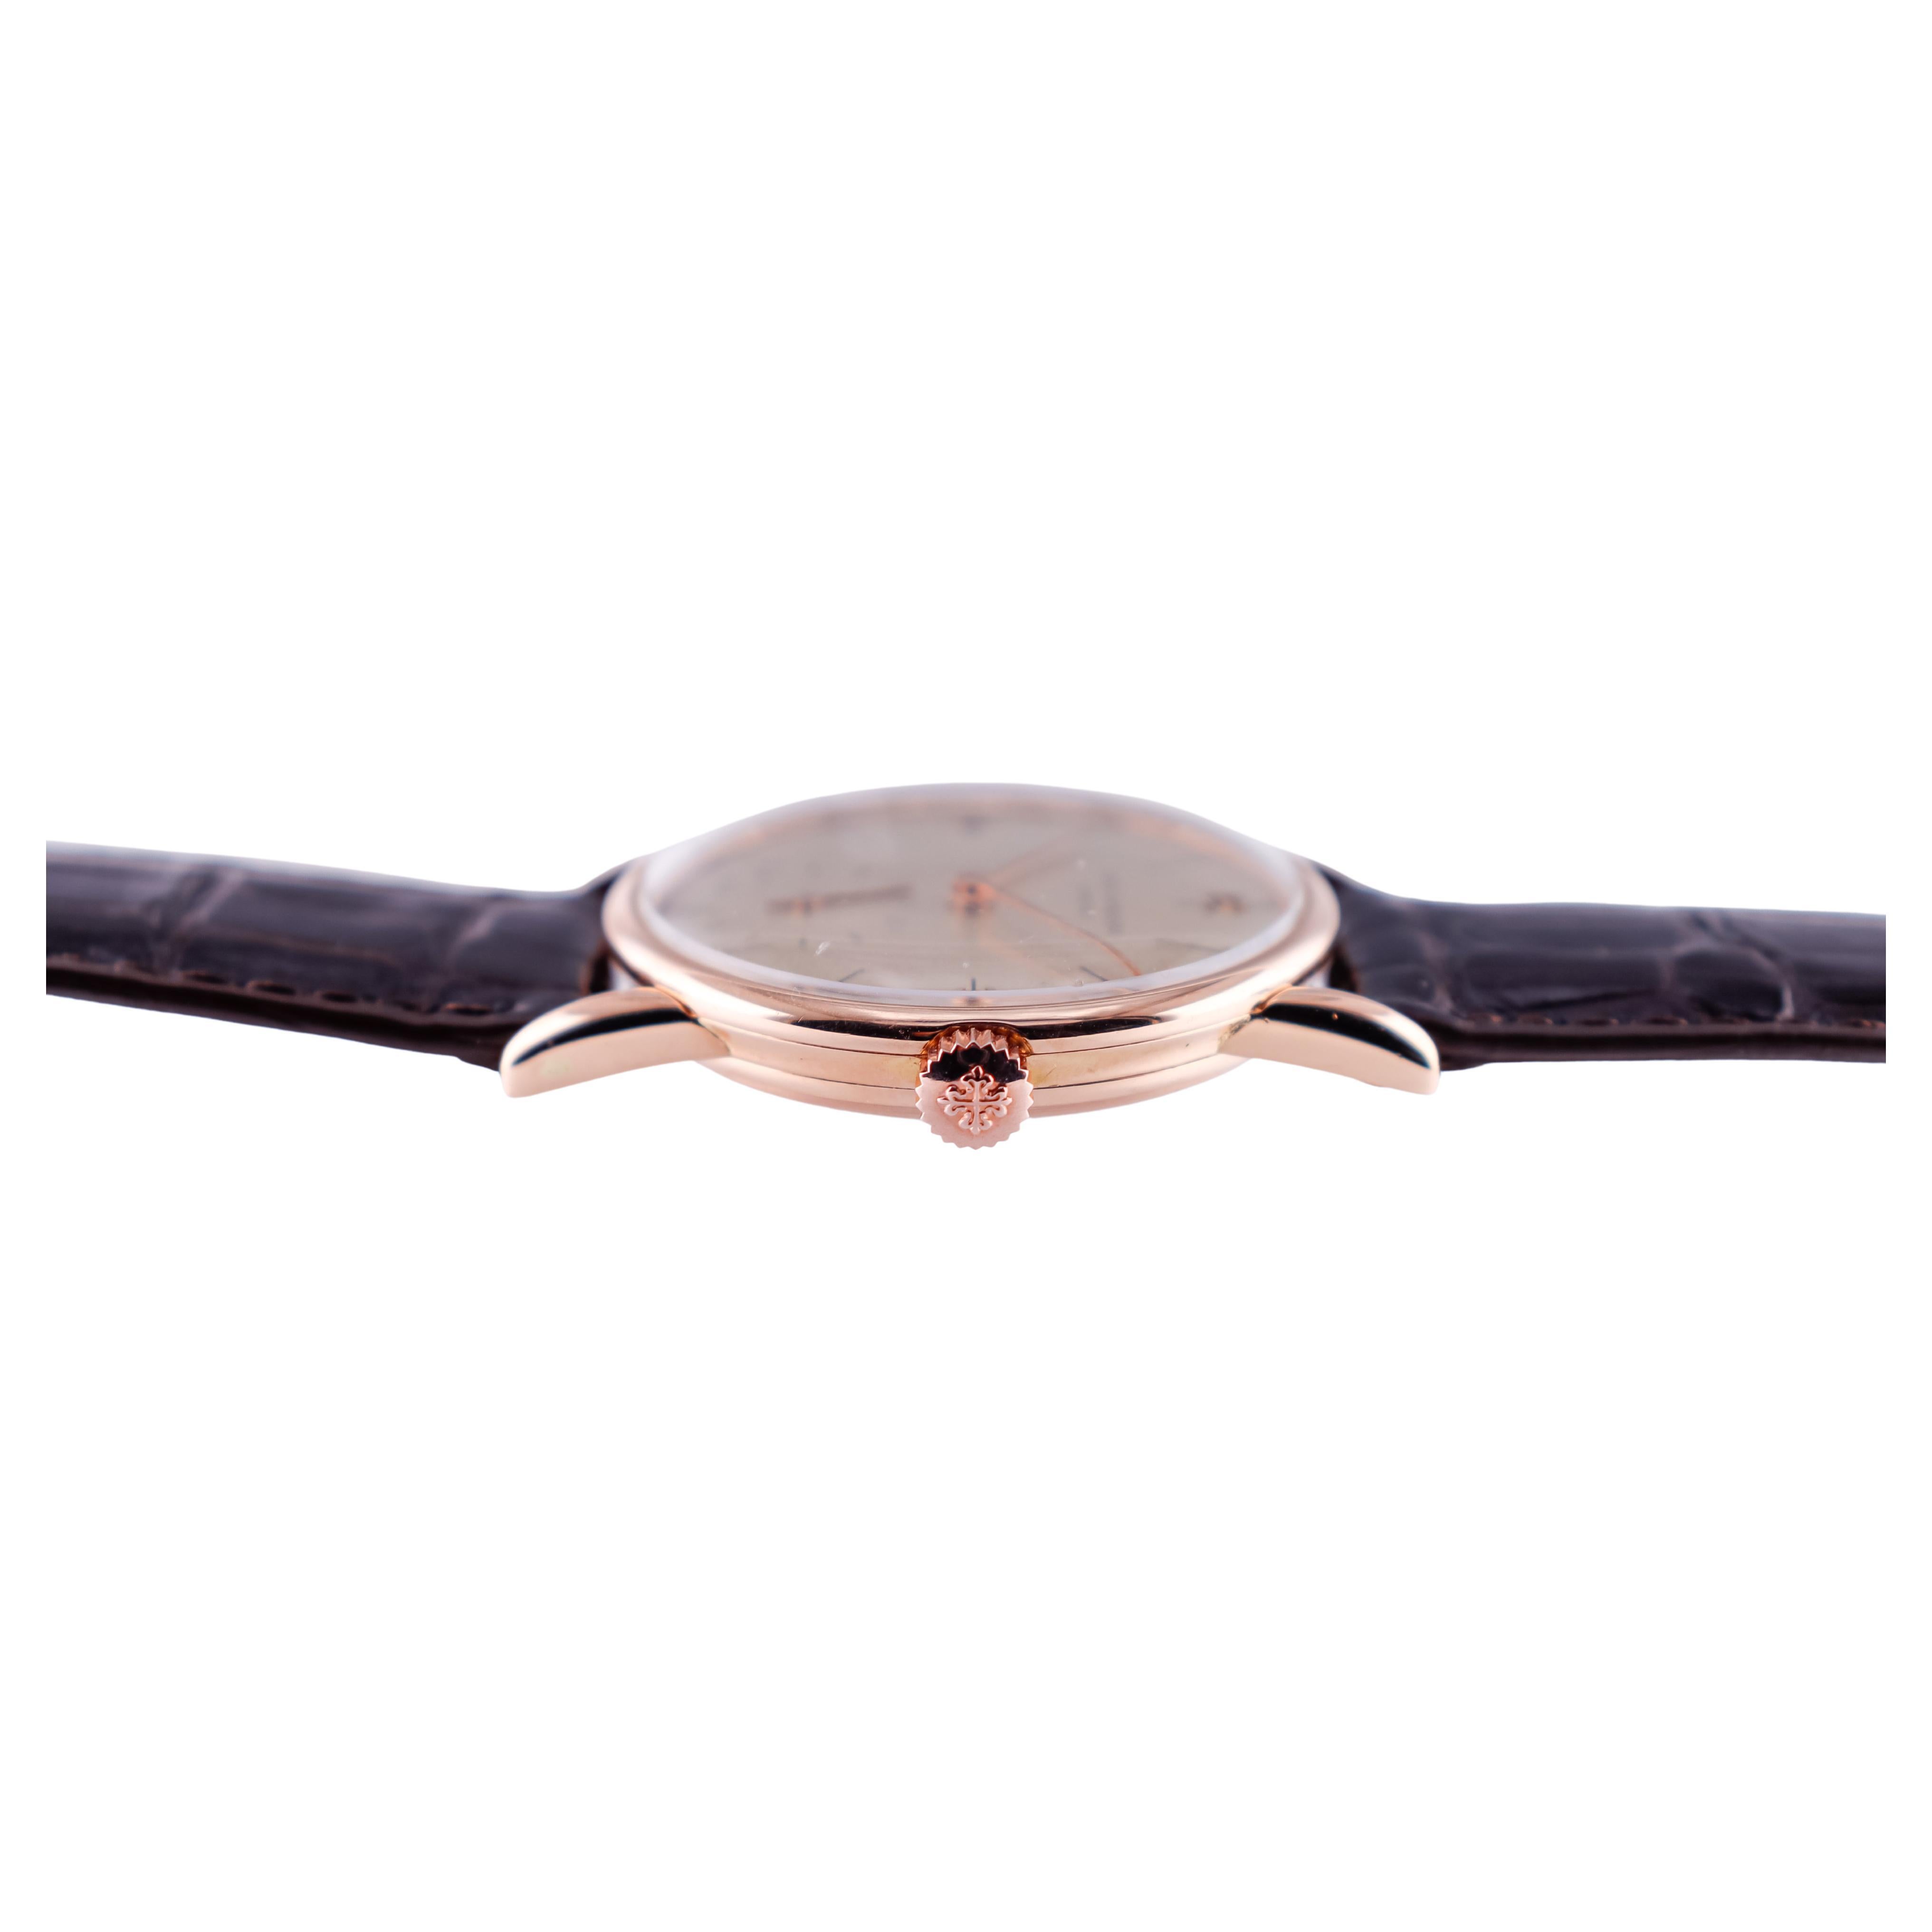 Patek Philippe 18kt. Rose Gold Art Deco Round Original Dial from 1940s For Sale 3